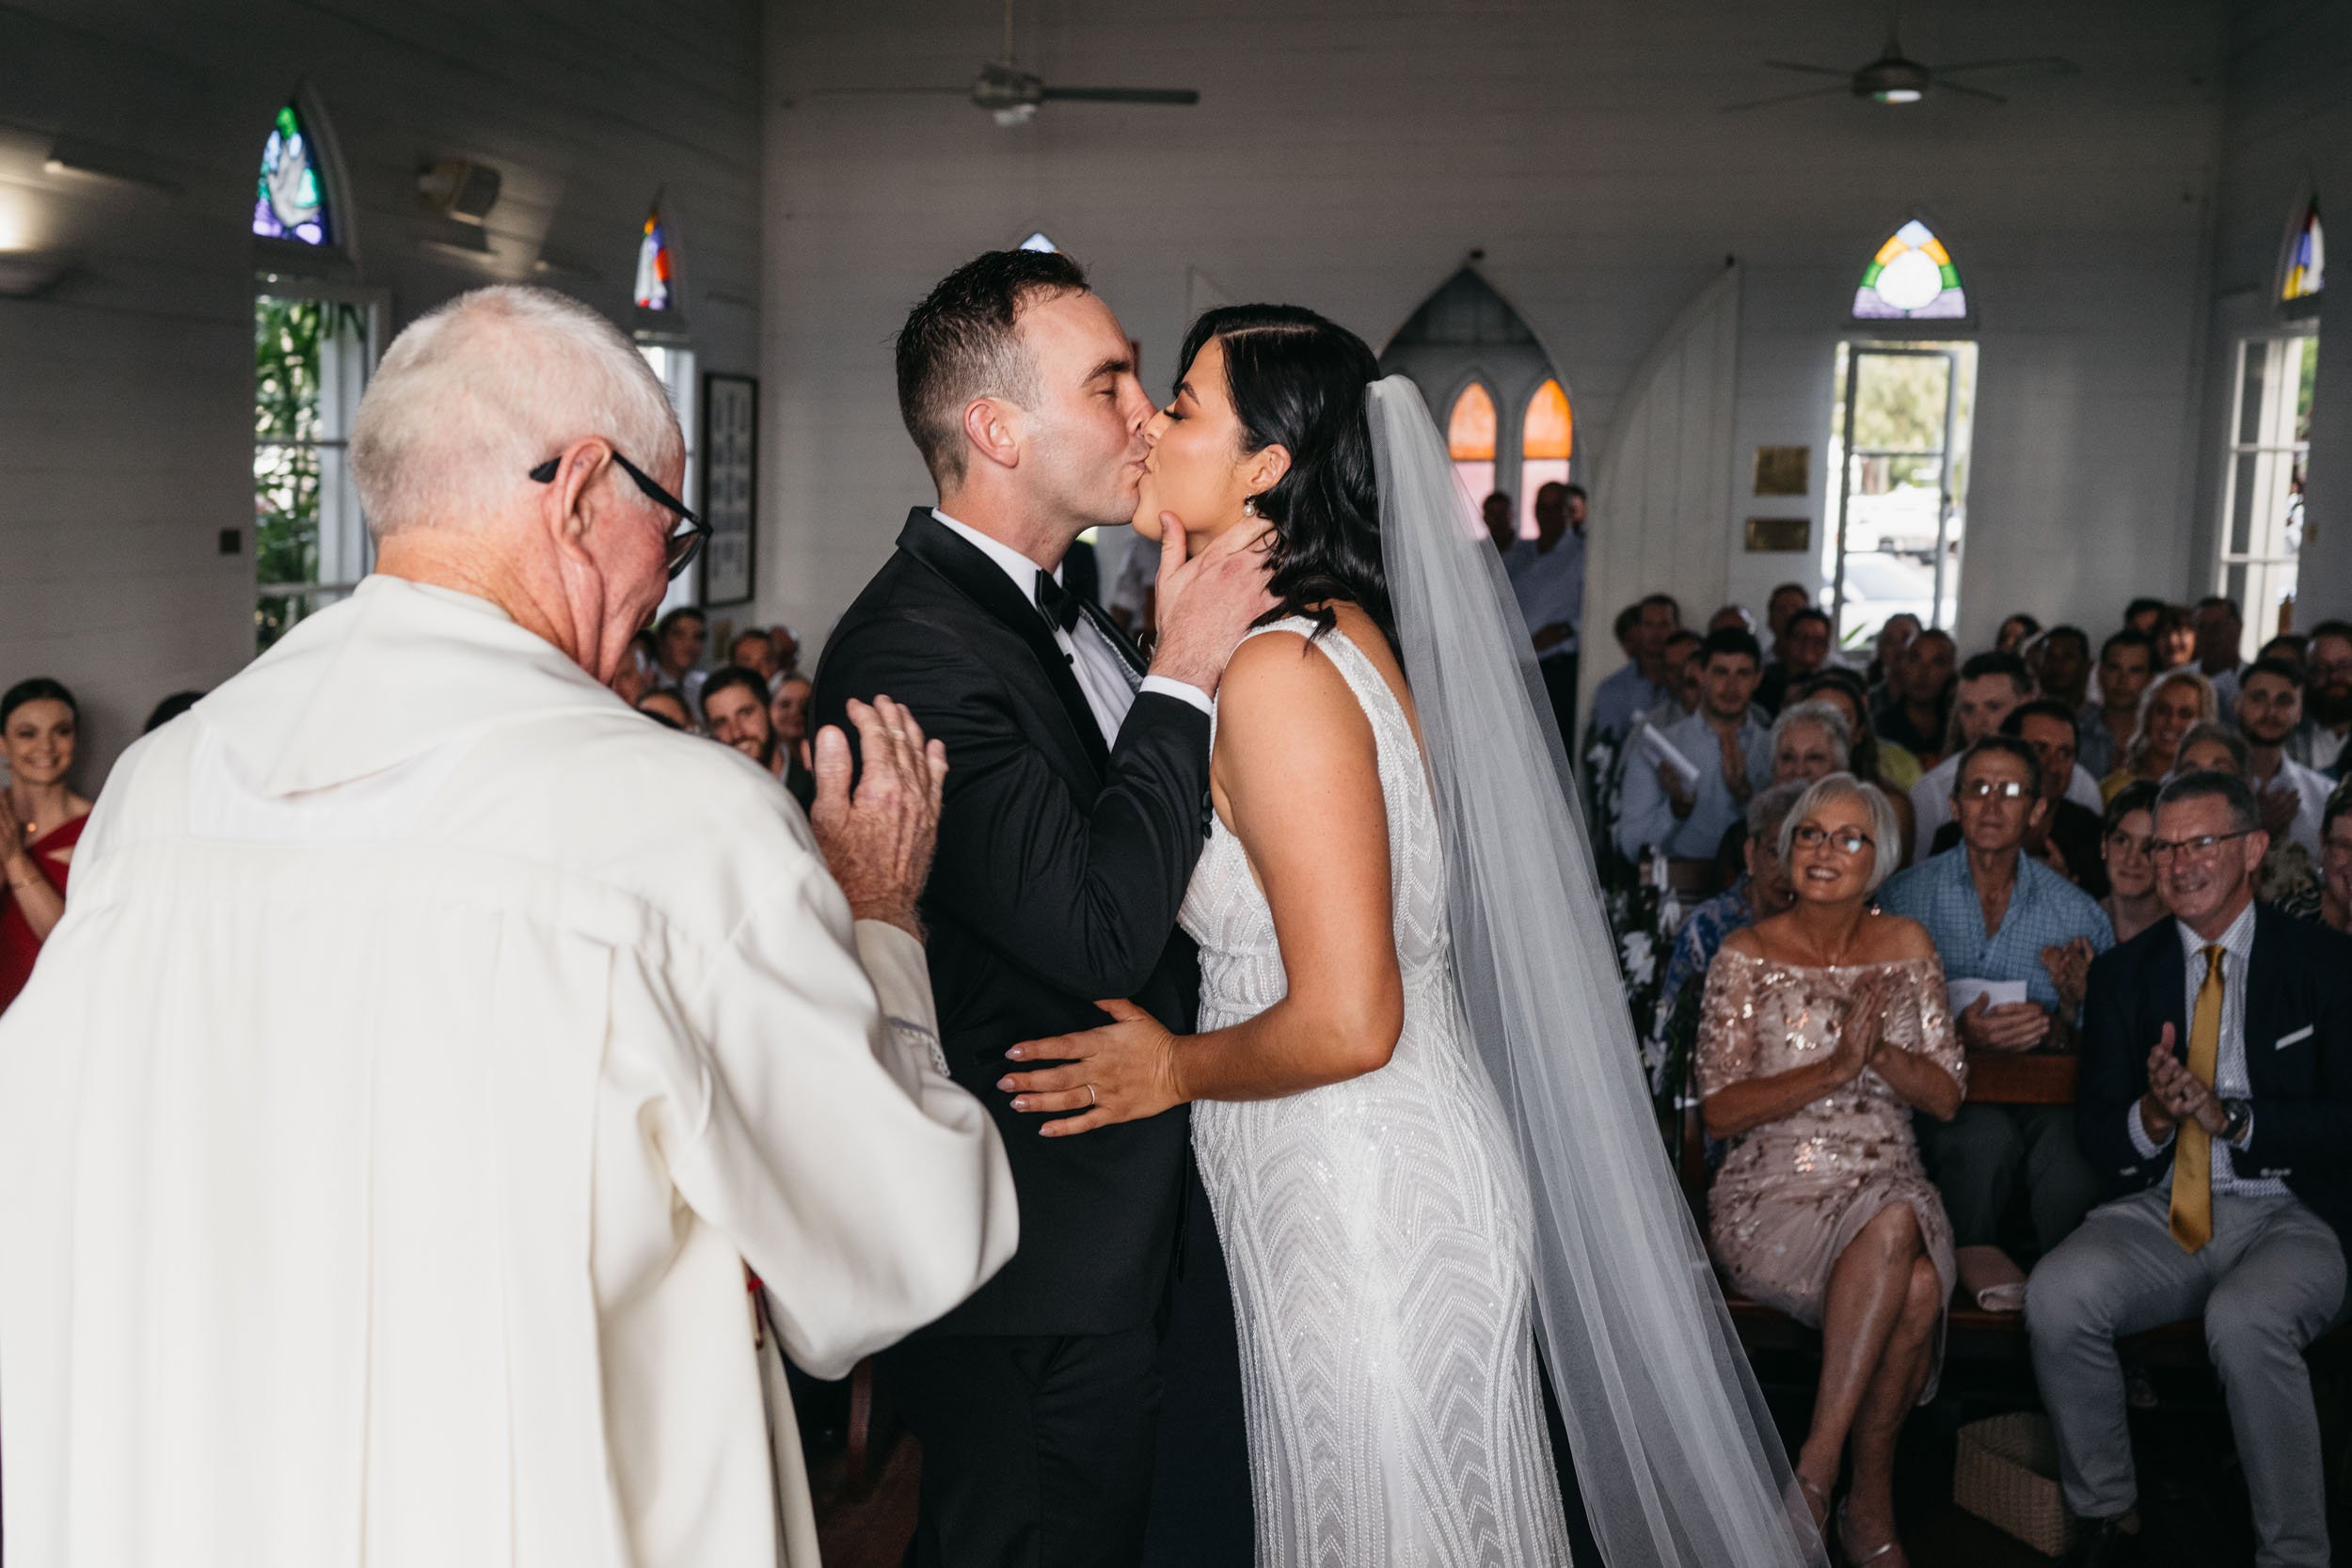 The Raw Photographer - Cairns Wedding Photographer - Port Douglas ceremony venues and locations ST MARYS-6.jpg